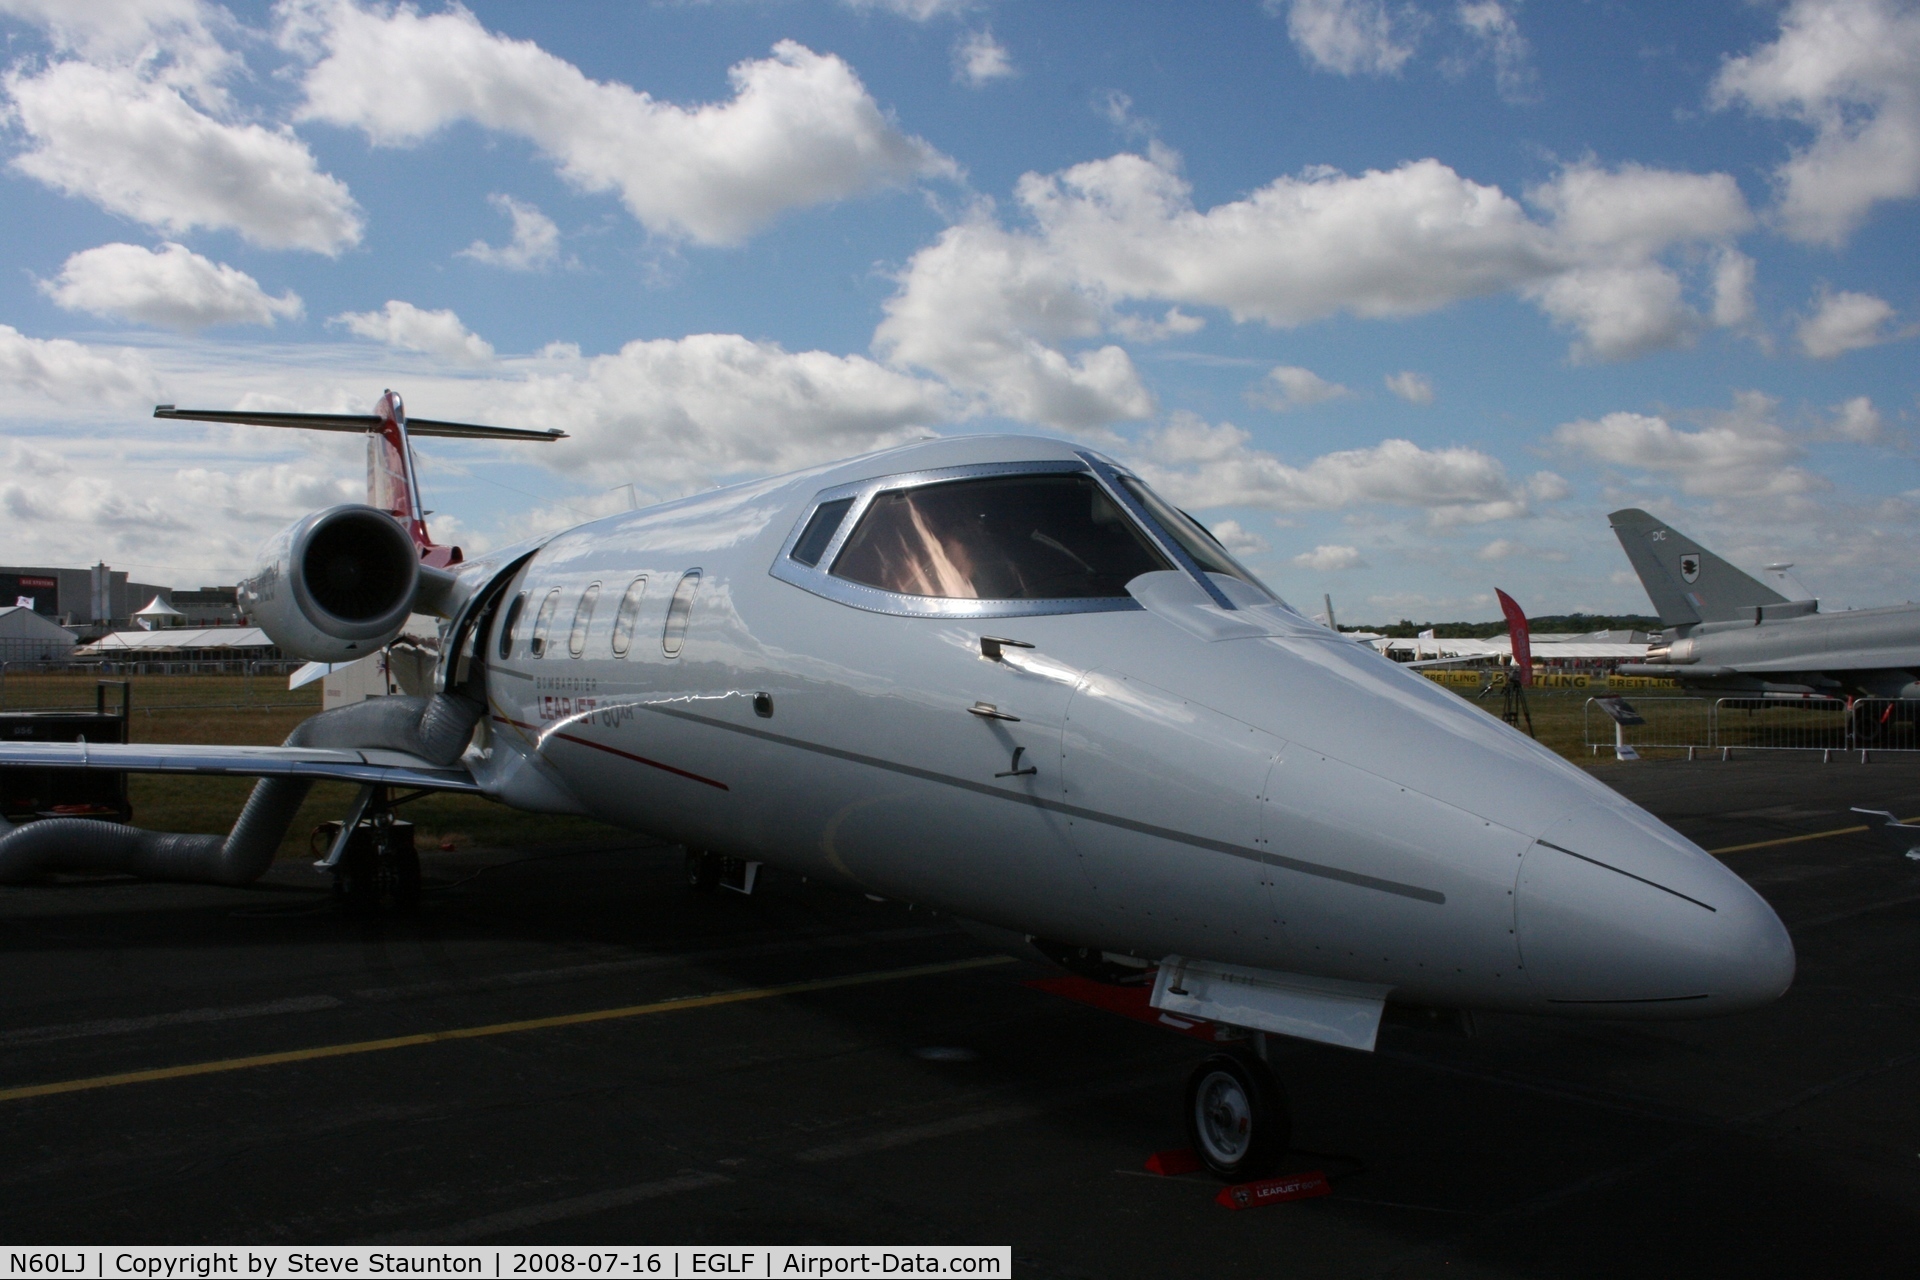 N60LJ, 2000 Learjet 60 C/N 164, Taken at Farnborough Airshow on the Wednesday trade day, 16th July 2009